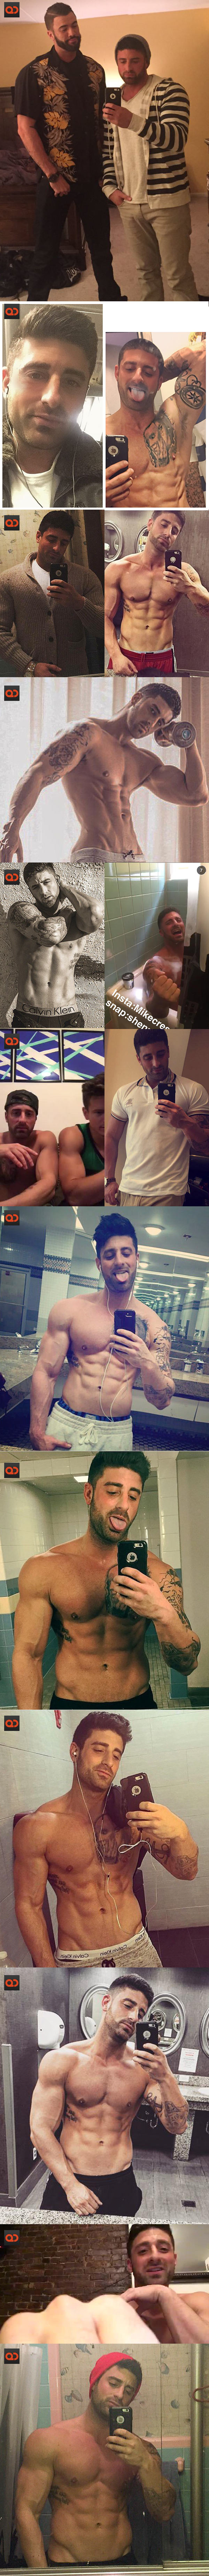 “Magic” Mike Crescenzo, From MTV's Real World Seattle Bad Blood, Naked Photos From His Past Surface!